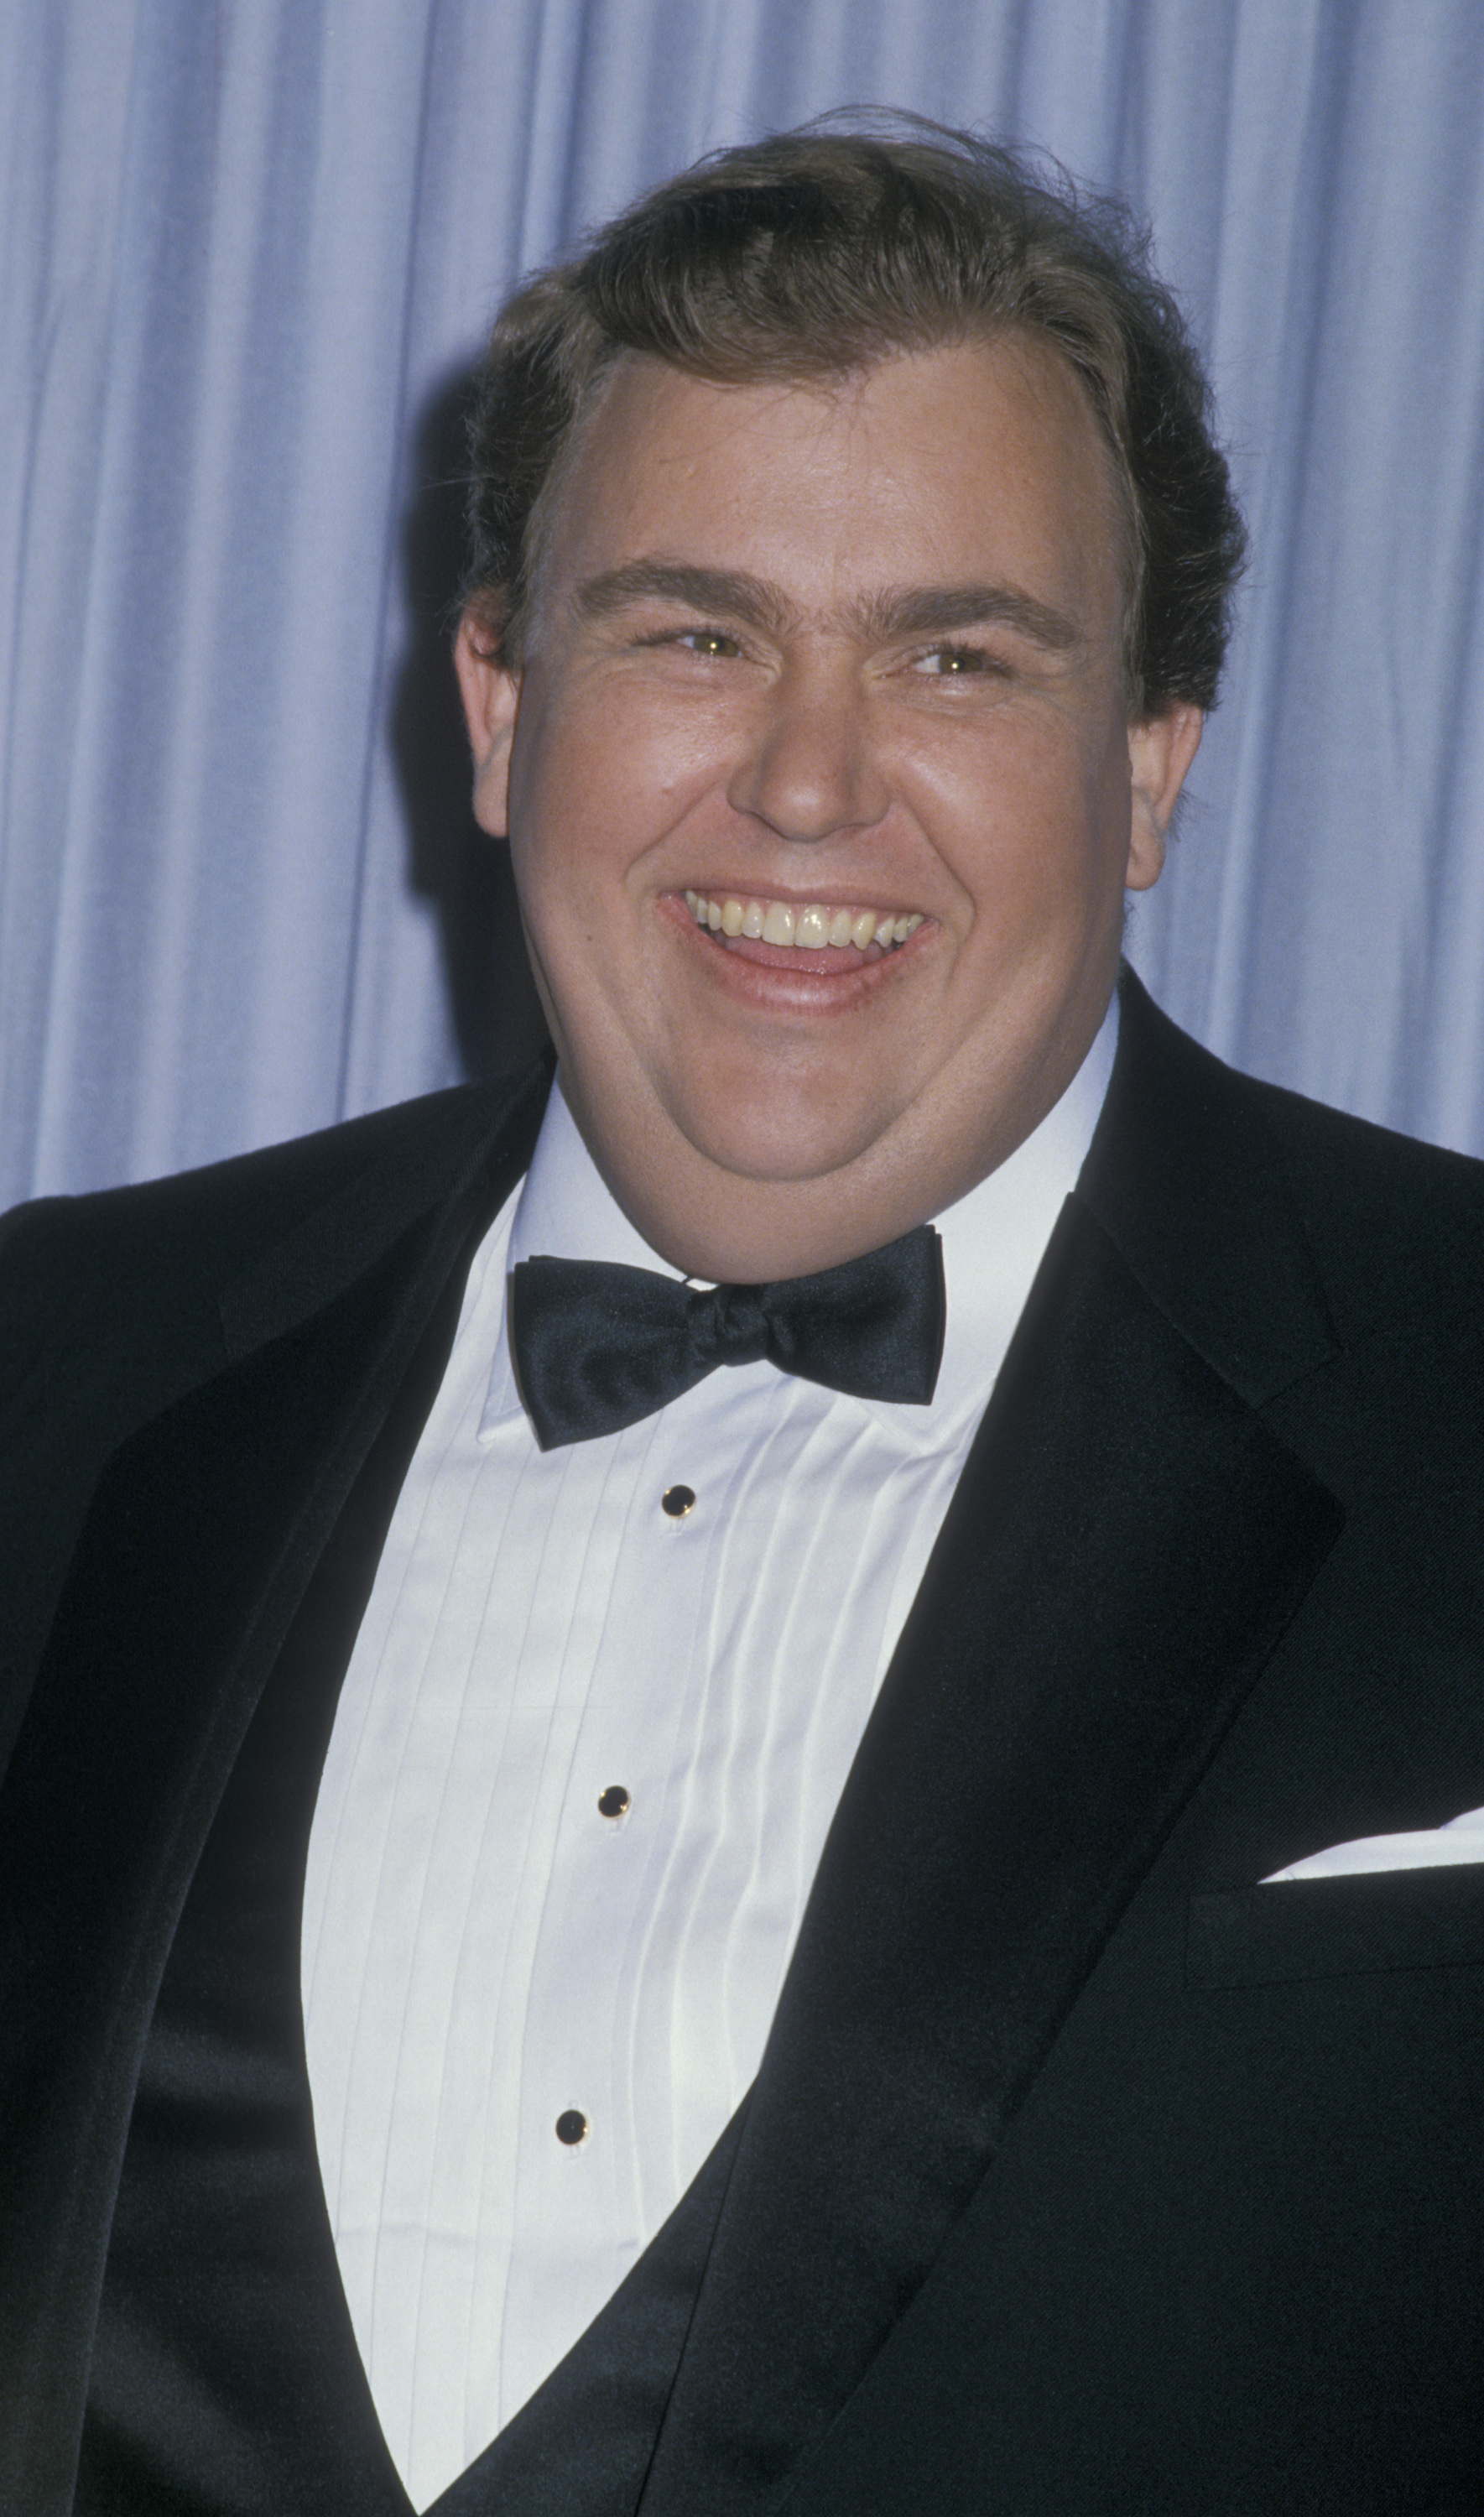 John Candy at the 60th Annual Academy Awards on April 11, 1988, in Los Angeles. | Source: Getty Images